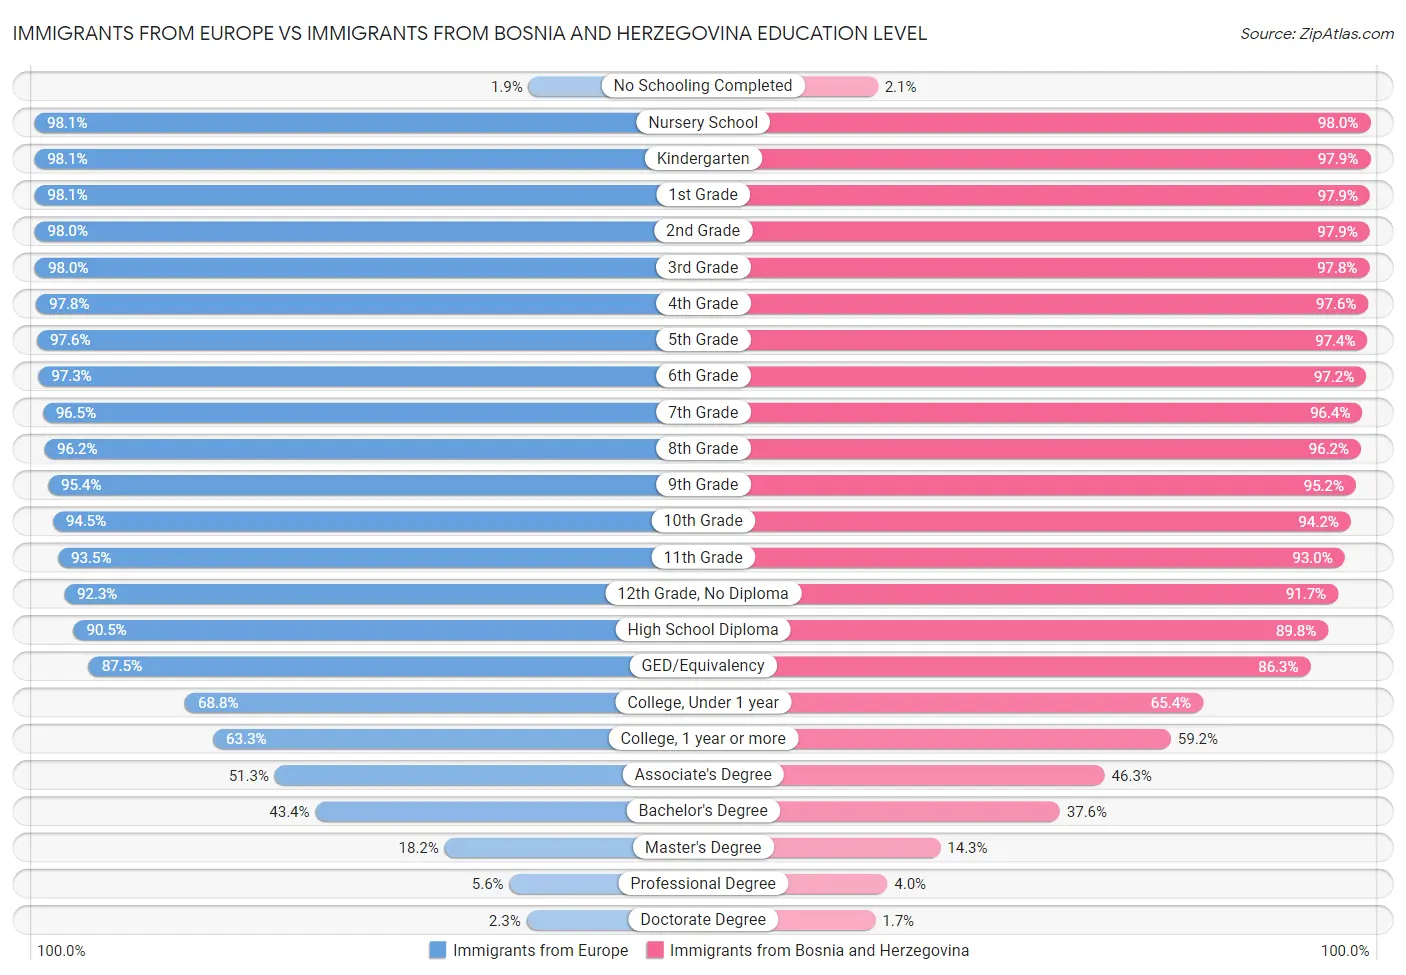 Immigrants from Europe vs Immigrants from Bosnia and Herzegovina Education Level